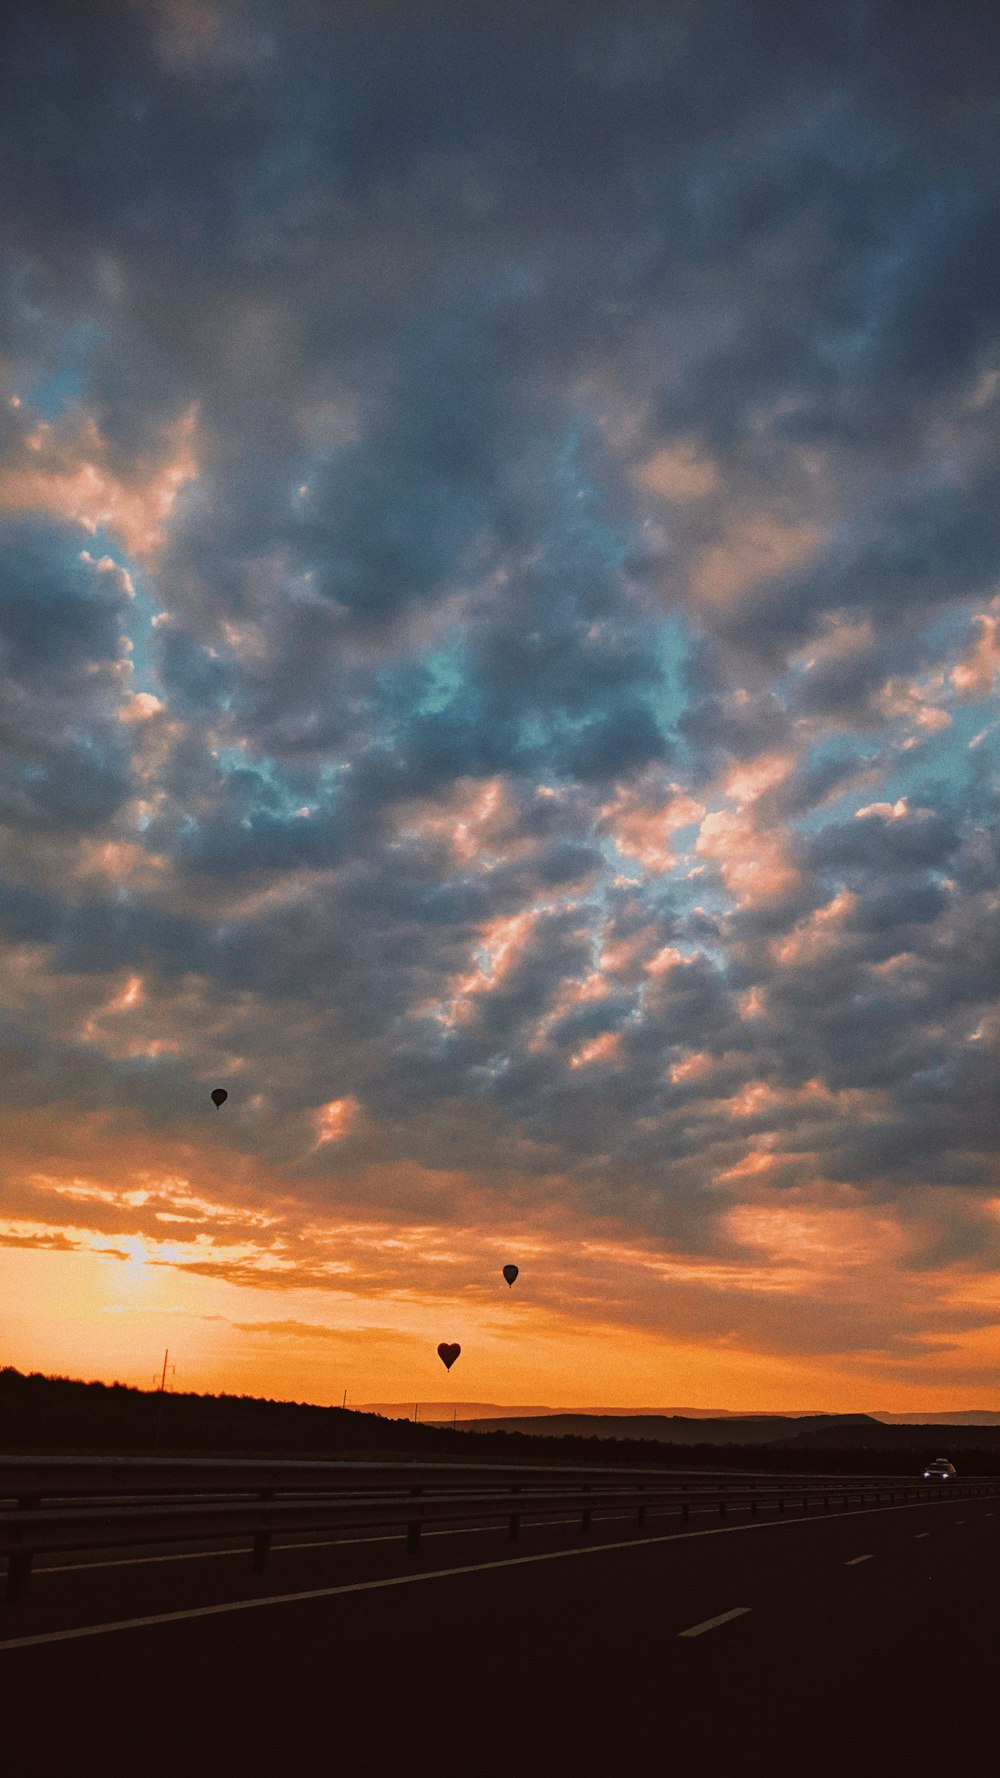 silhouette of birds flying under cloudy sky during sunset